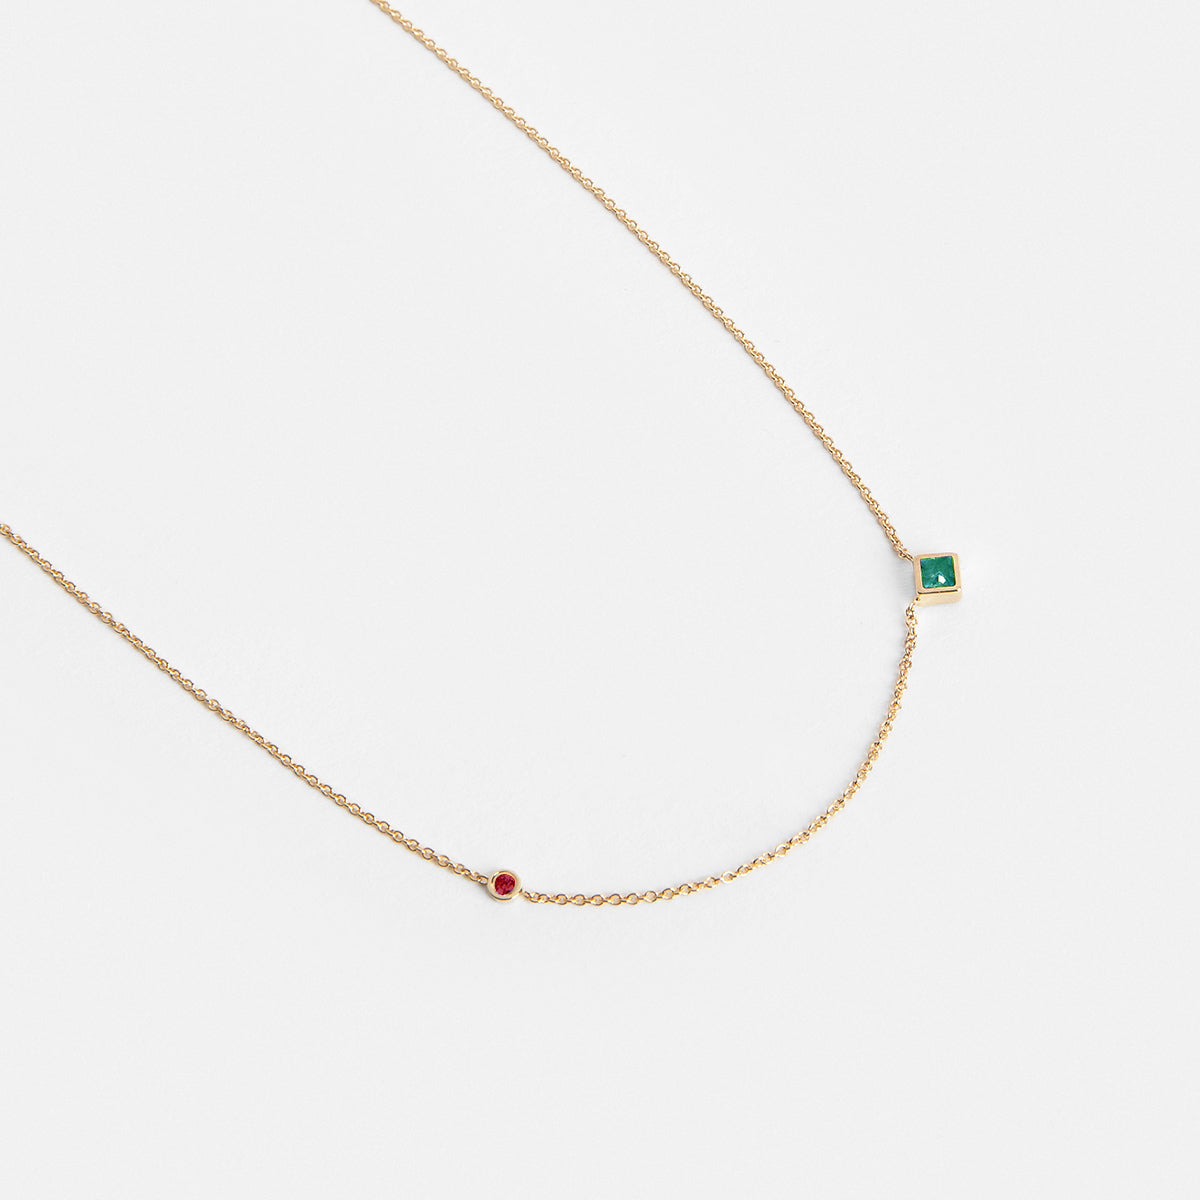 Isu Handmade Necklace in 14k Gold set with Ruby and Emerald By SHW Fine Jewelry NYC